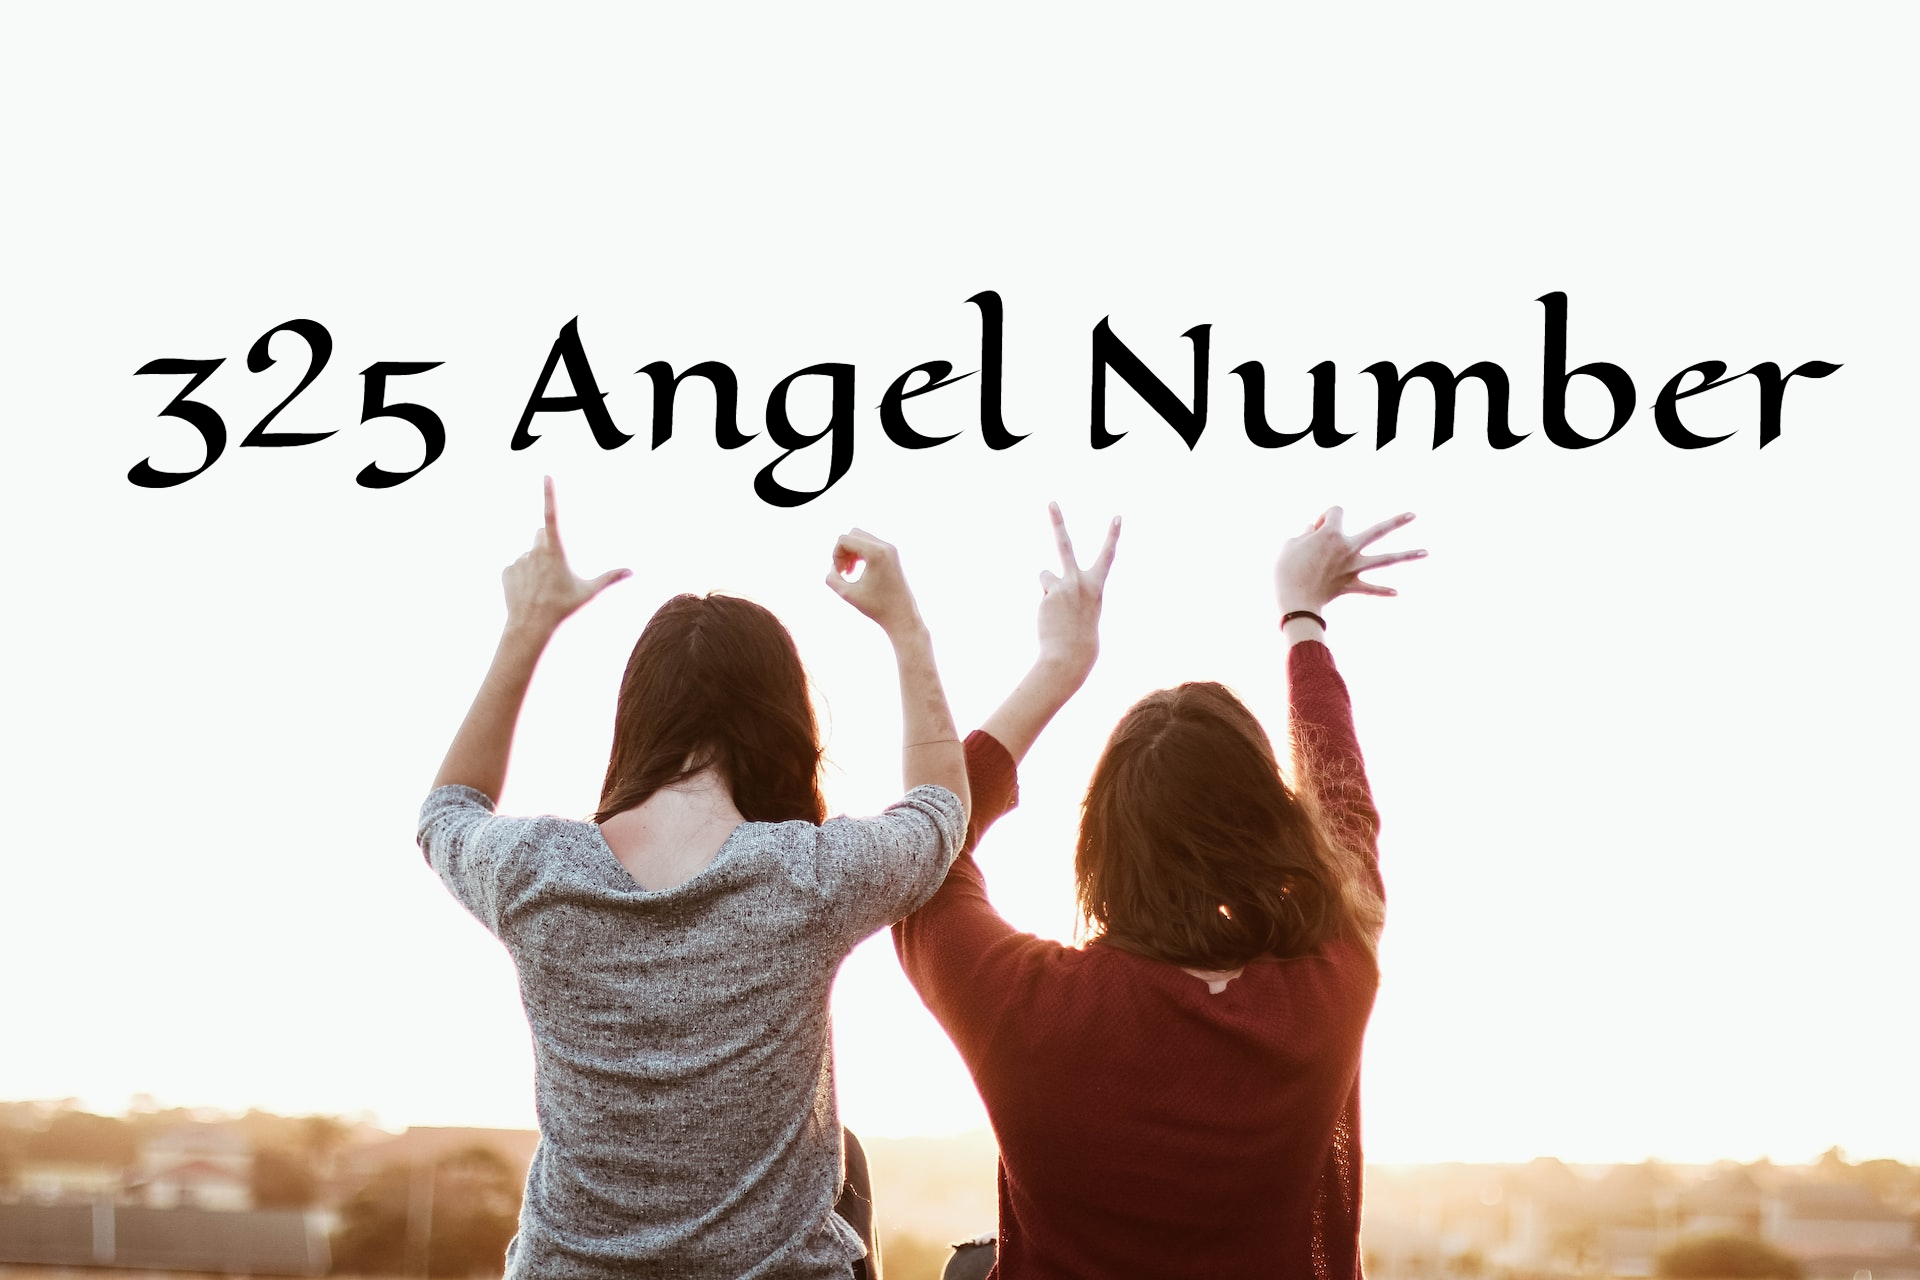 325 Angel Number - A Reminder To Increase Your Self Confidence